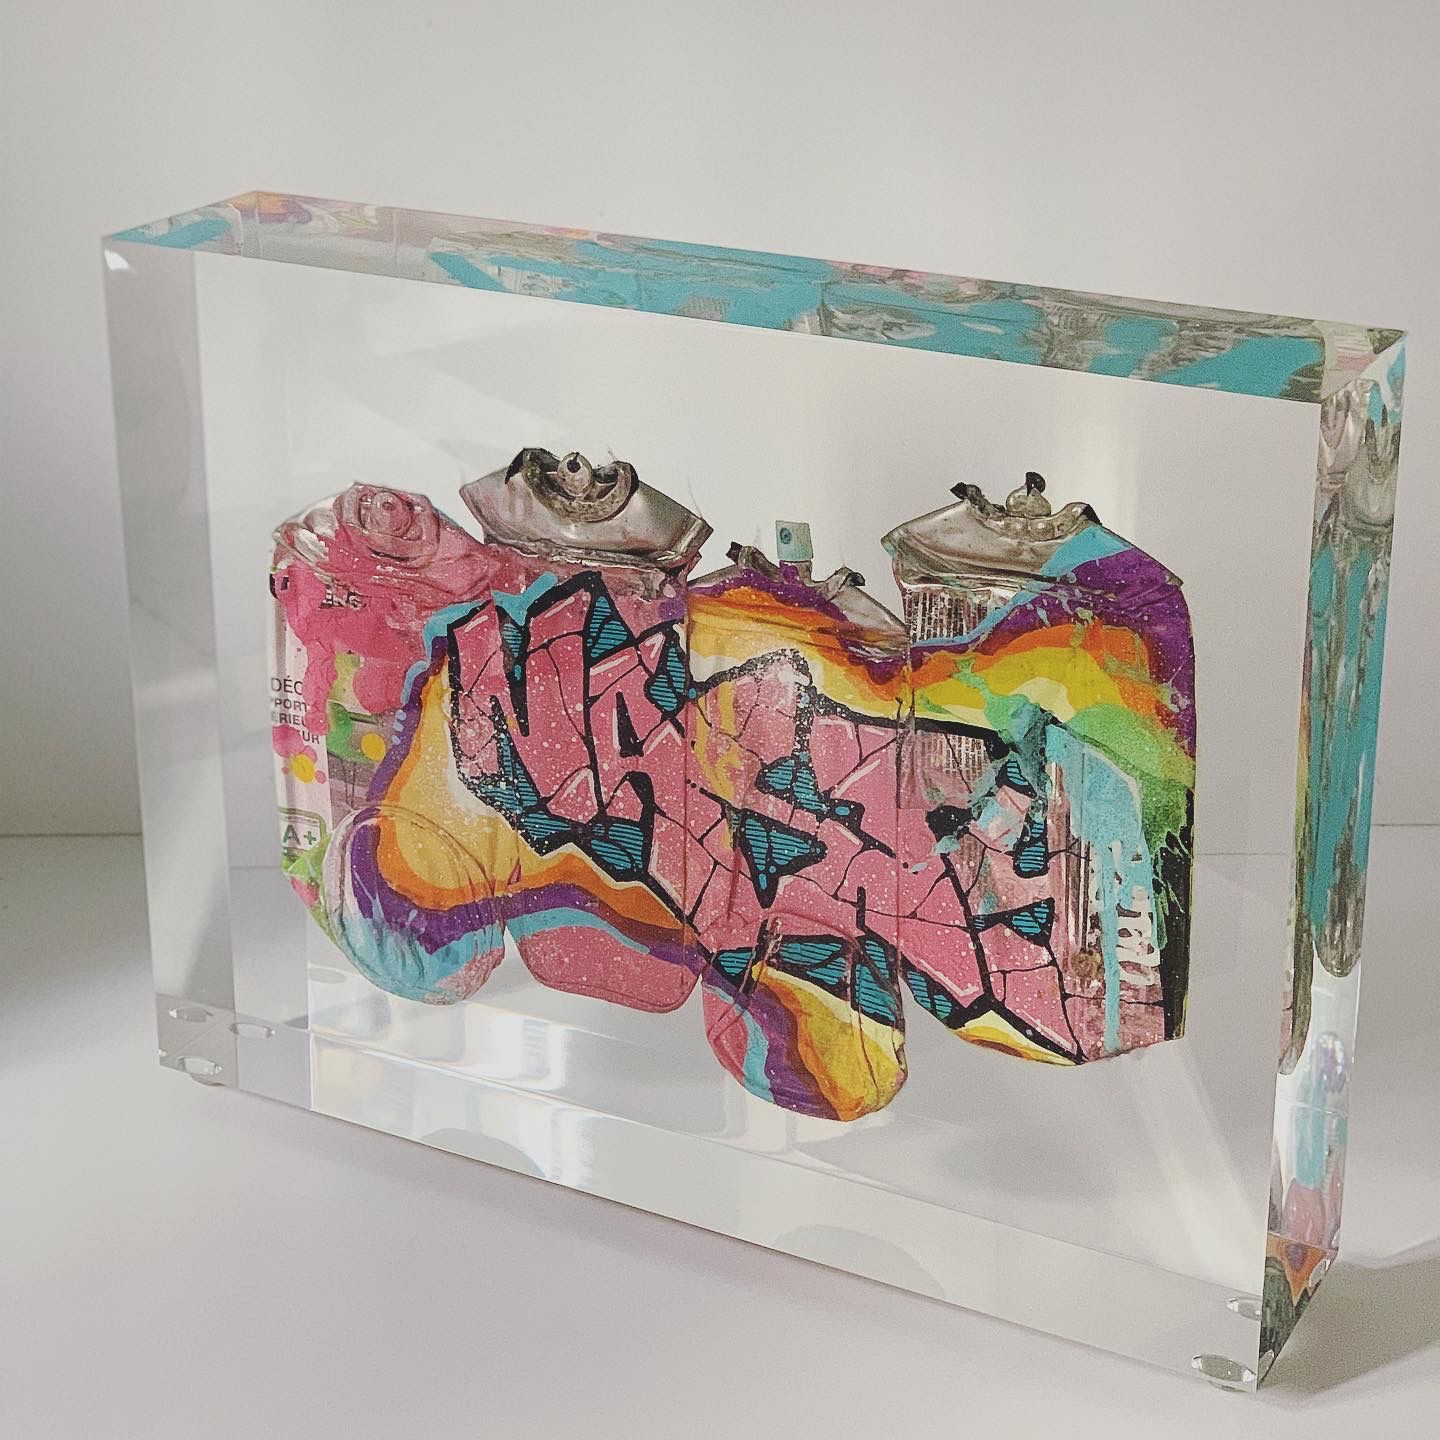 Null NASTY

Untitled, 2021

Inclusion of painted aerosol cans

30x40x10 cm